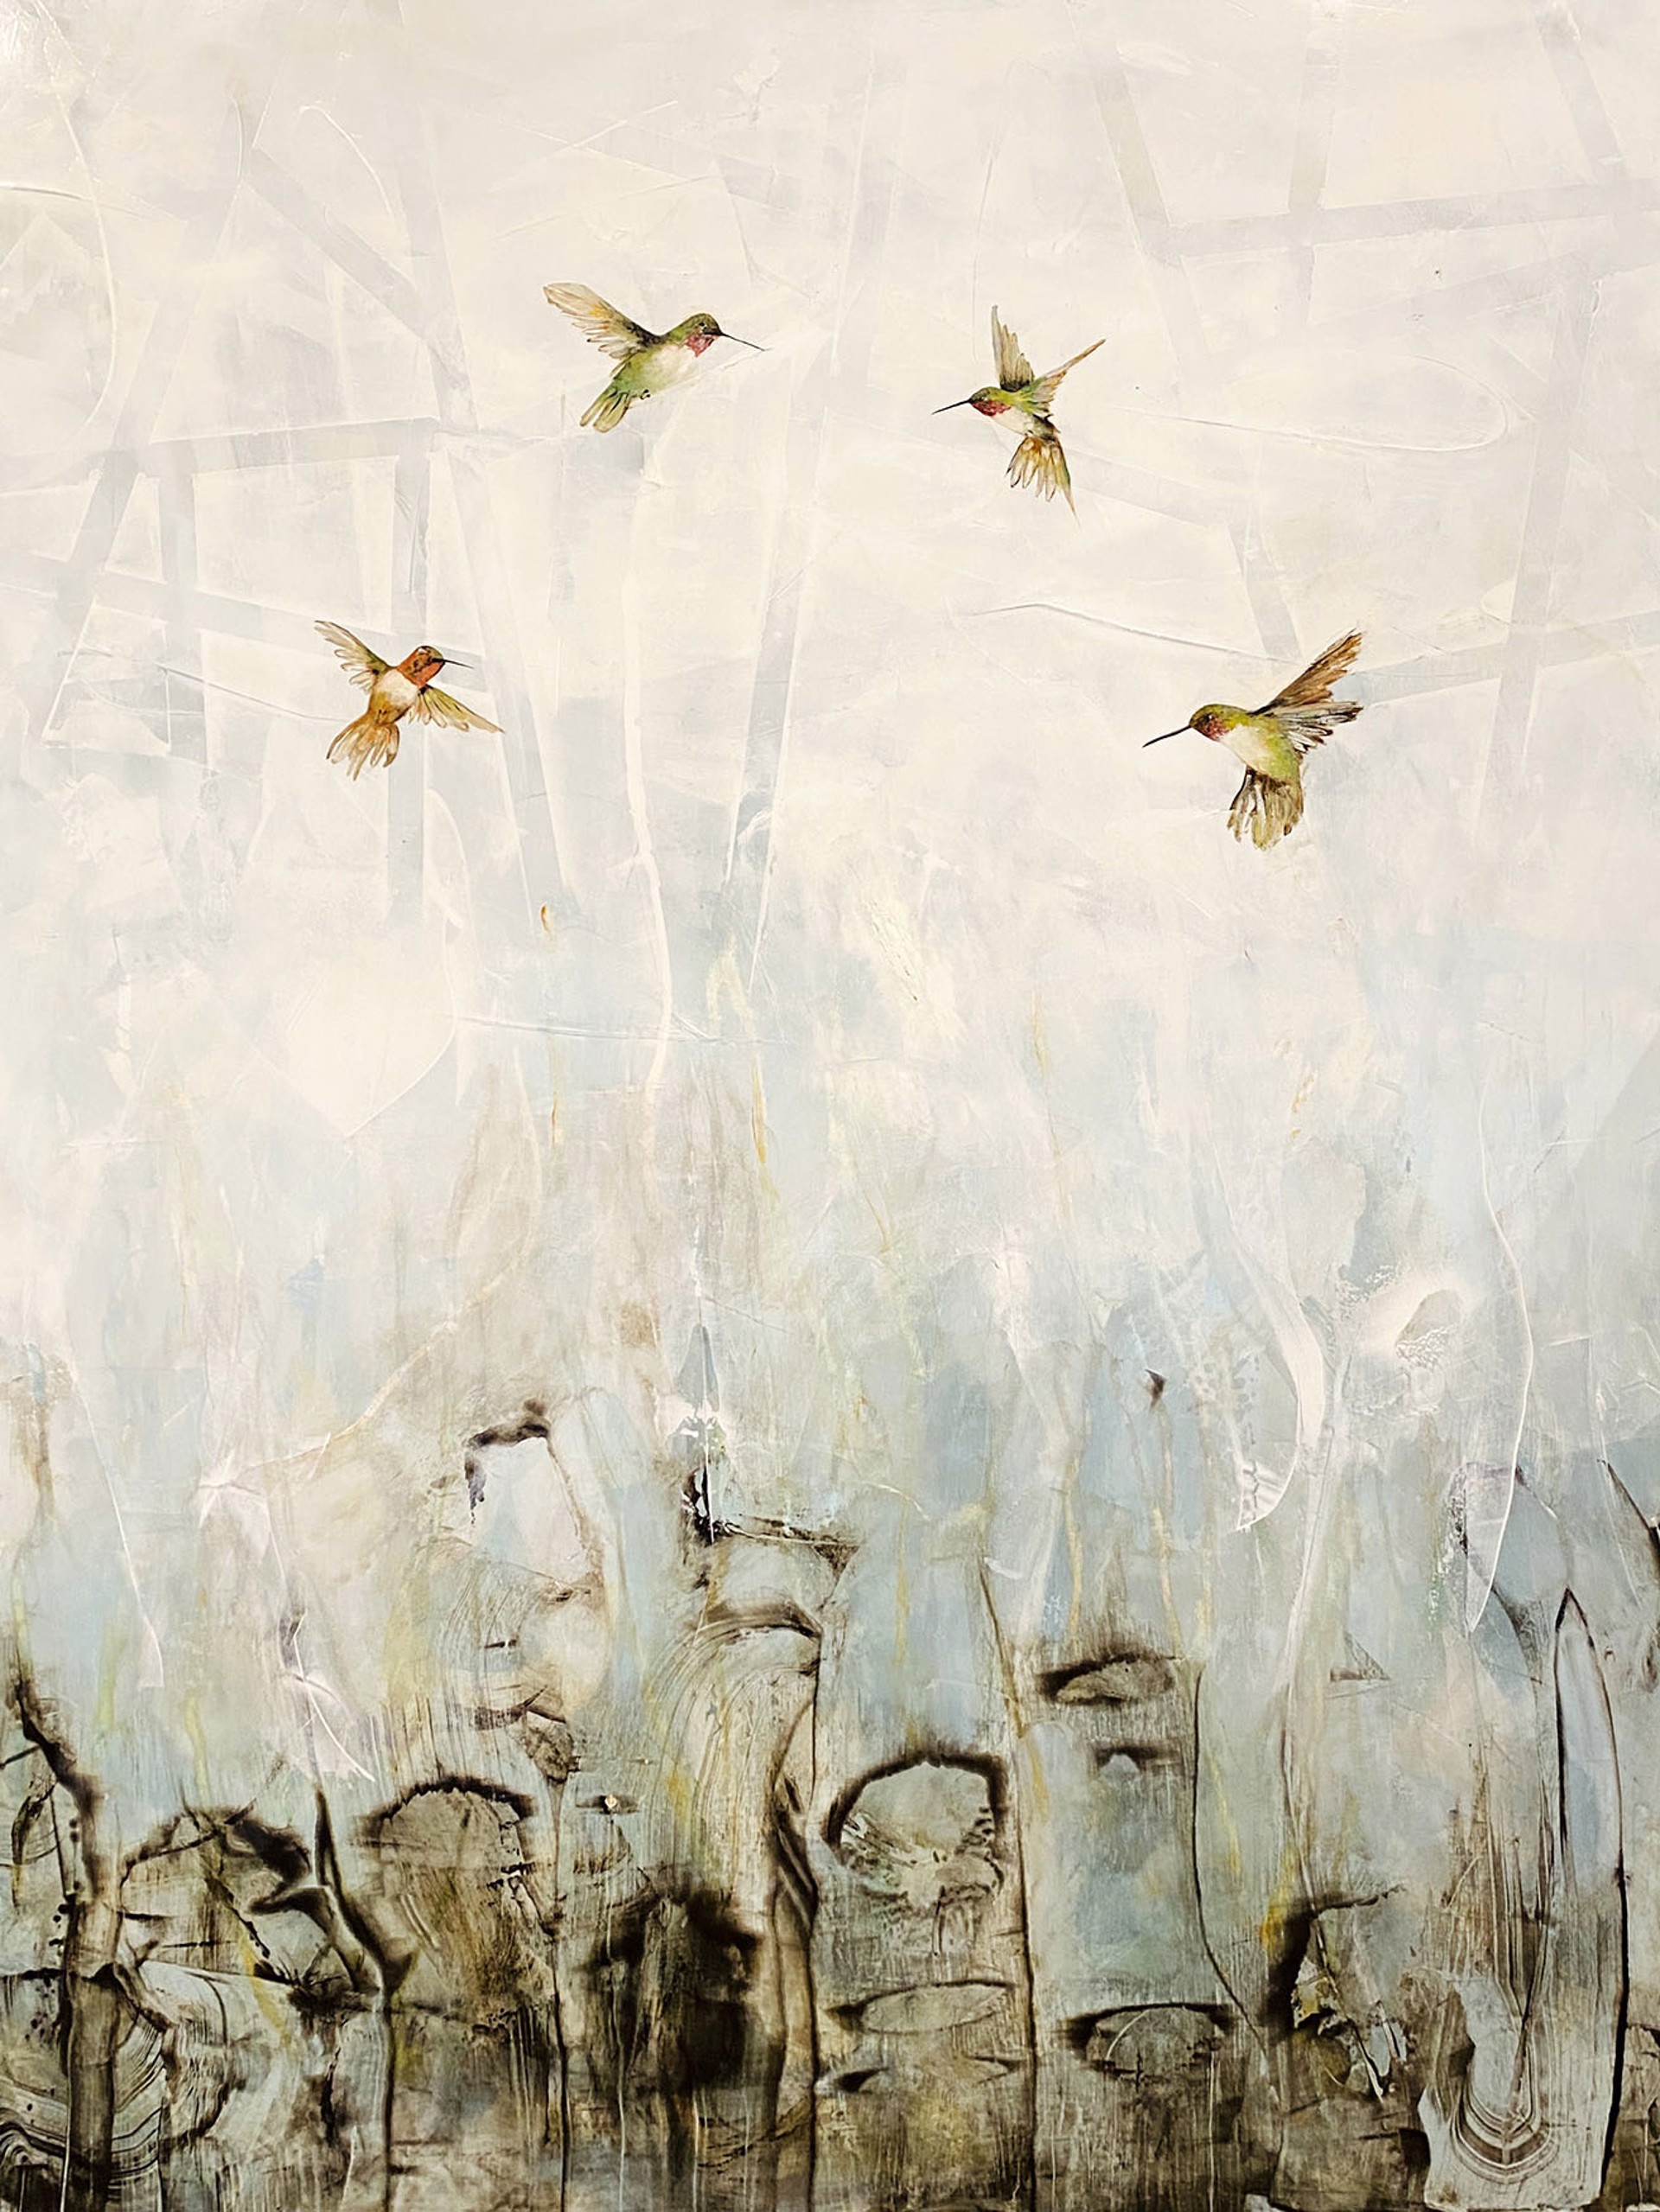 Original Oil Painting By Jenna Von Benedikt Featuring Four Hummingbirds Flying Above Abstracted Background In Vintage Feeling Neutral Tones